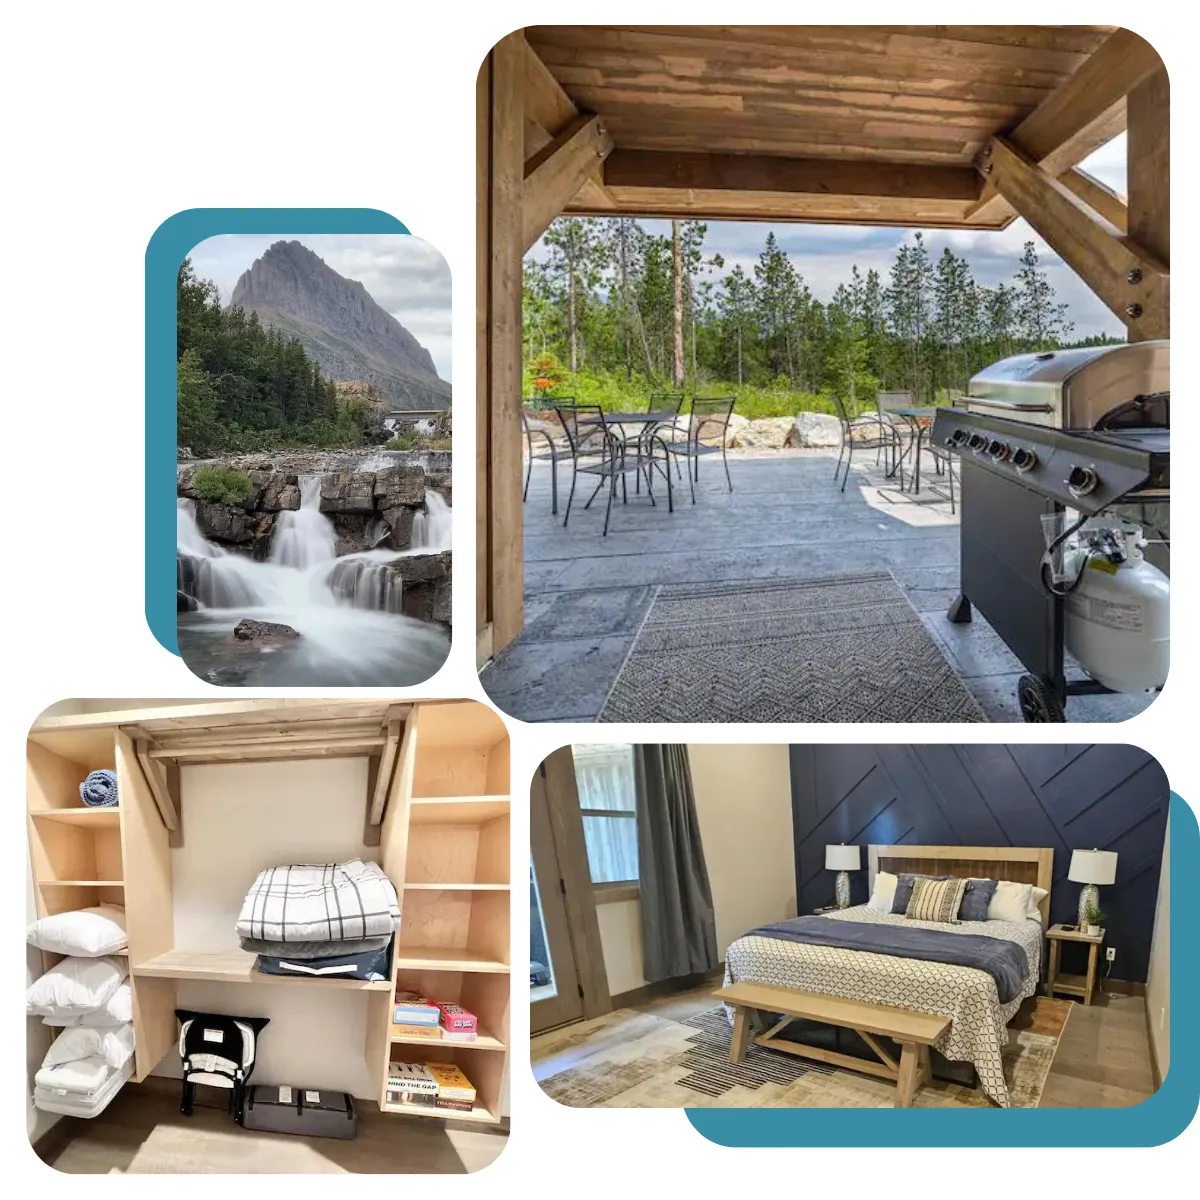 Experience the essence of Glacier in our cozy 2-bedroom, 2-bathroom retreat. Relax in luxury with plush beds, smart TVs, and a fully equipped kitchen. Soak in the outdoor hot tub or gather around the fire pit for a peaceful night under the stars.